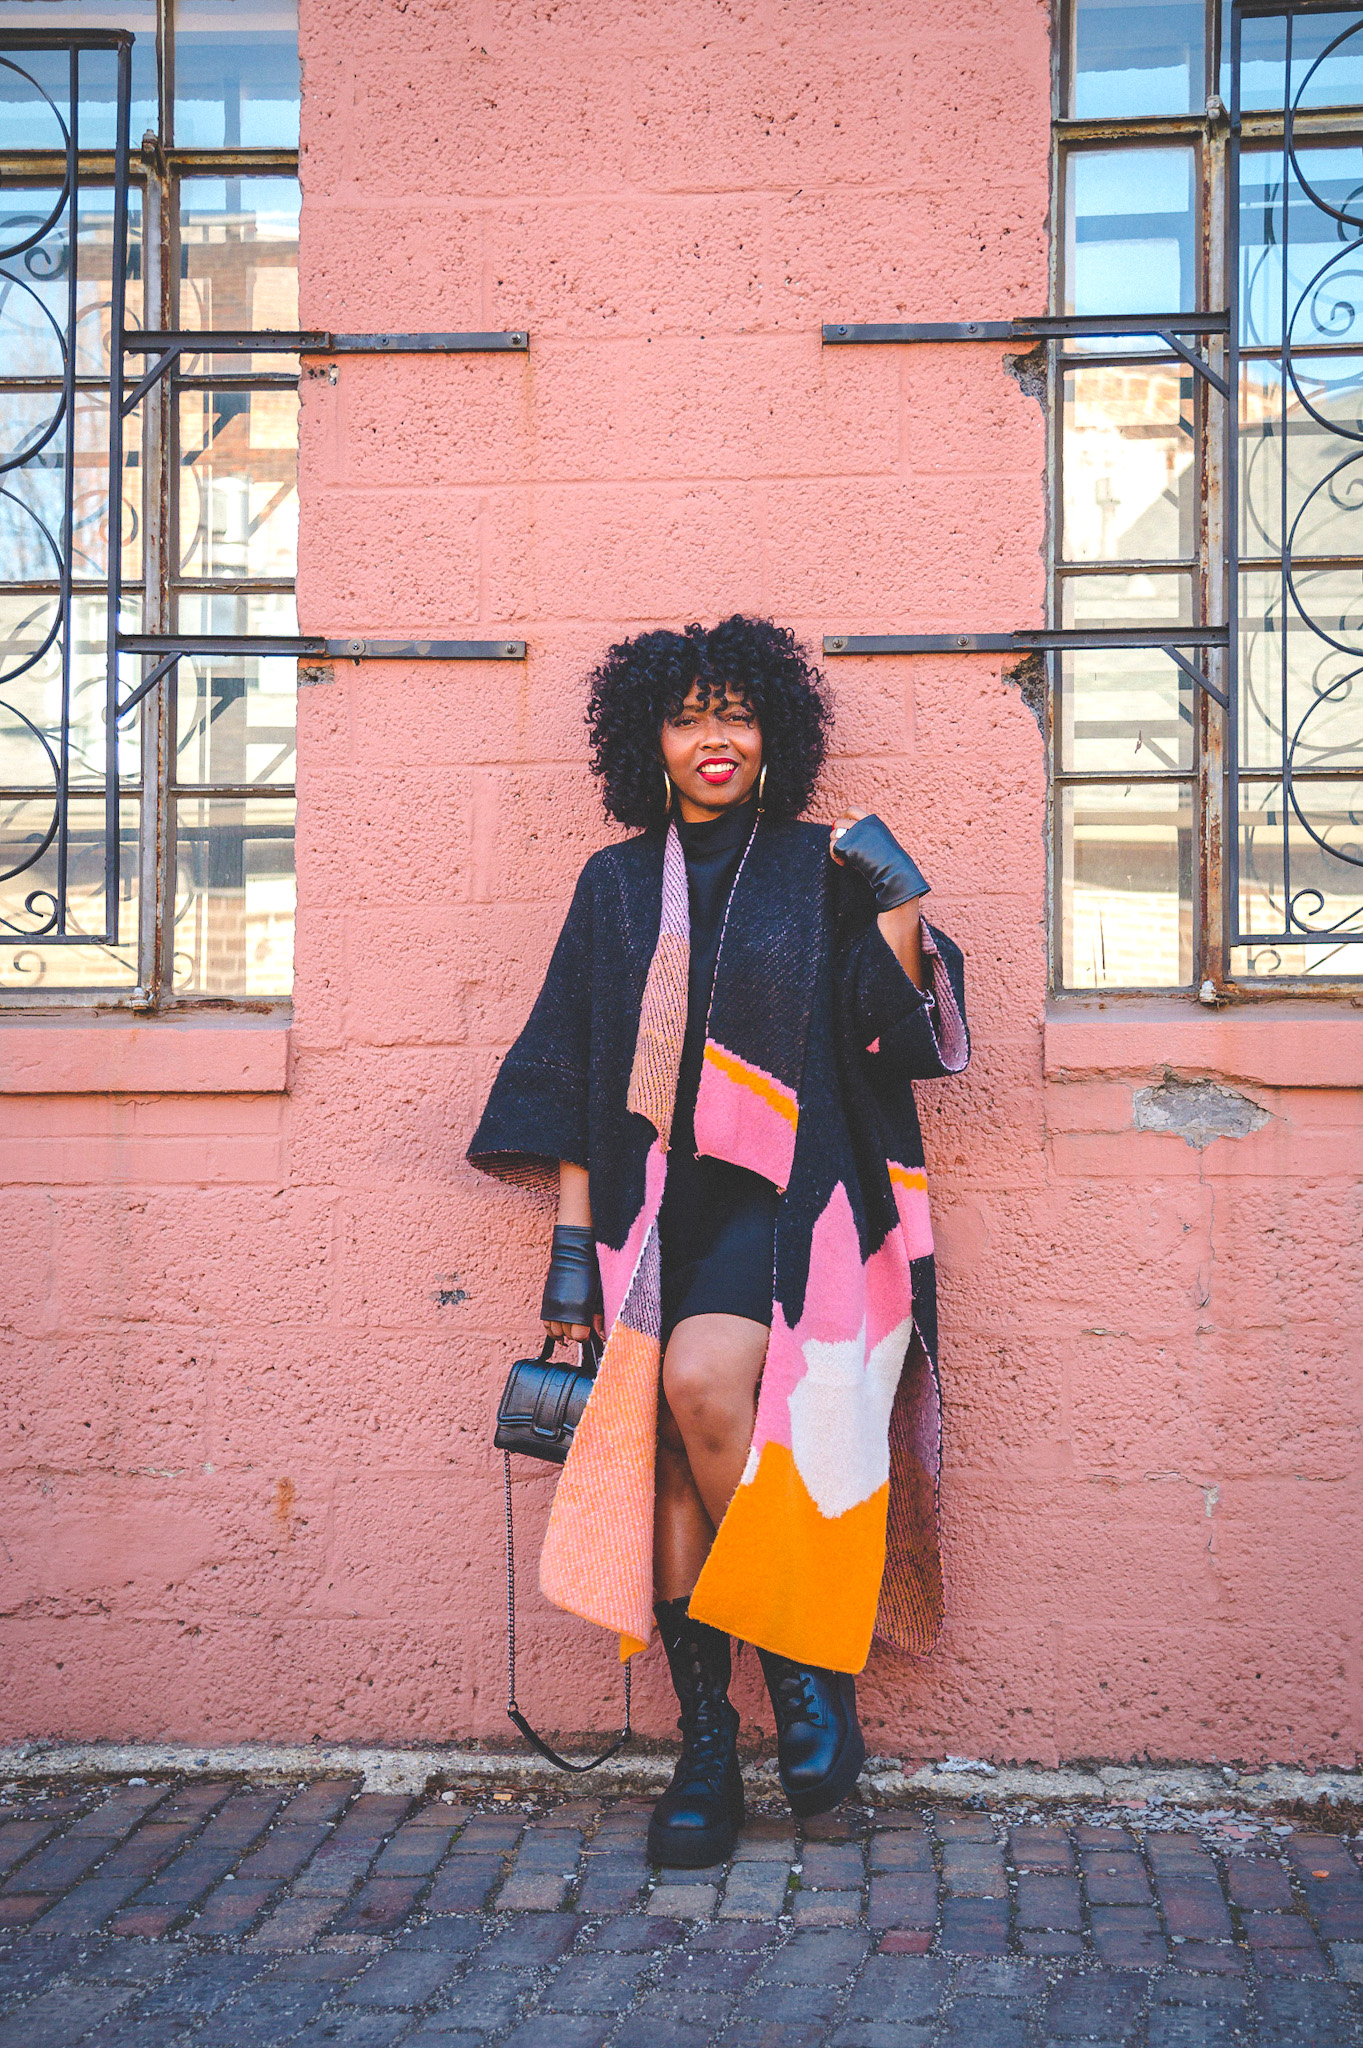 HOLIDAY OUTFIT IDEA, SWEENEE STYLE, HOW TO WEAR ALL BLACK, CARDIGANS FOR WINTER, WINTER OUTFIT IDEAS, INDIANAPOLIS FASHION BLOG, INDIANAPOLIS STYLE BLOG, CARDIGAN STYLE, HOW TO WEAR A CARDIGAN, BLACK GIRLS WHO BLOG